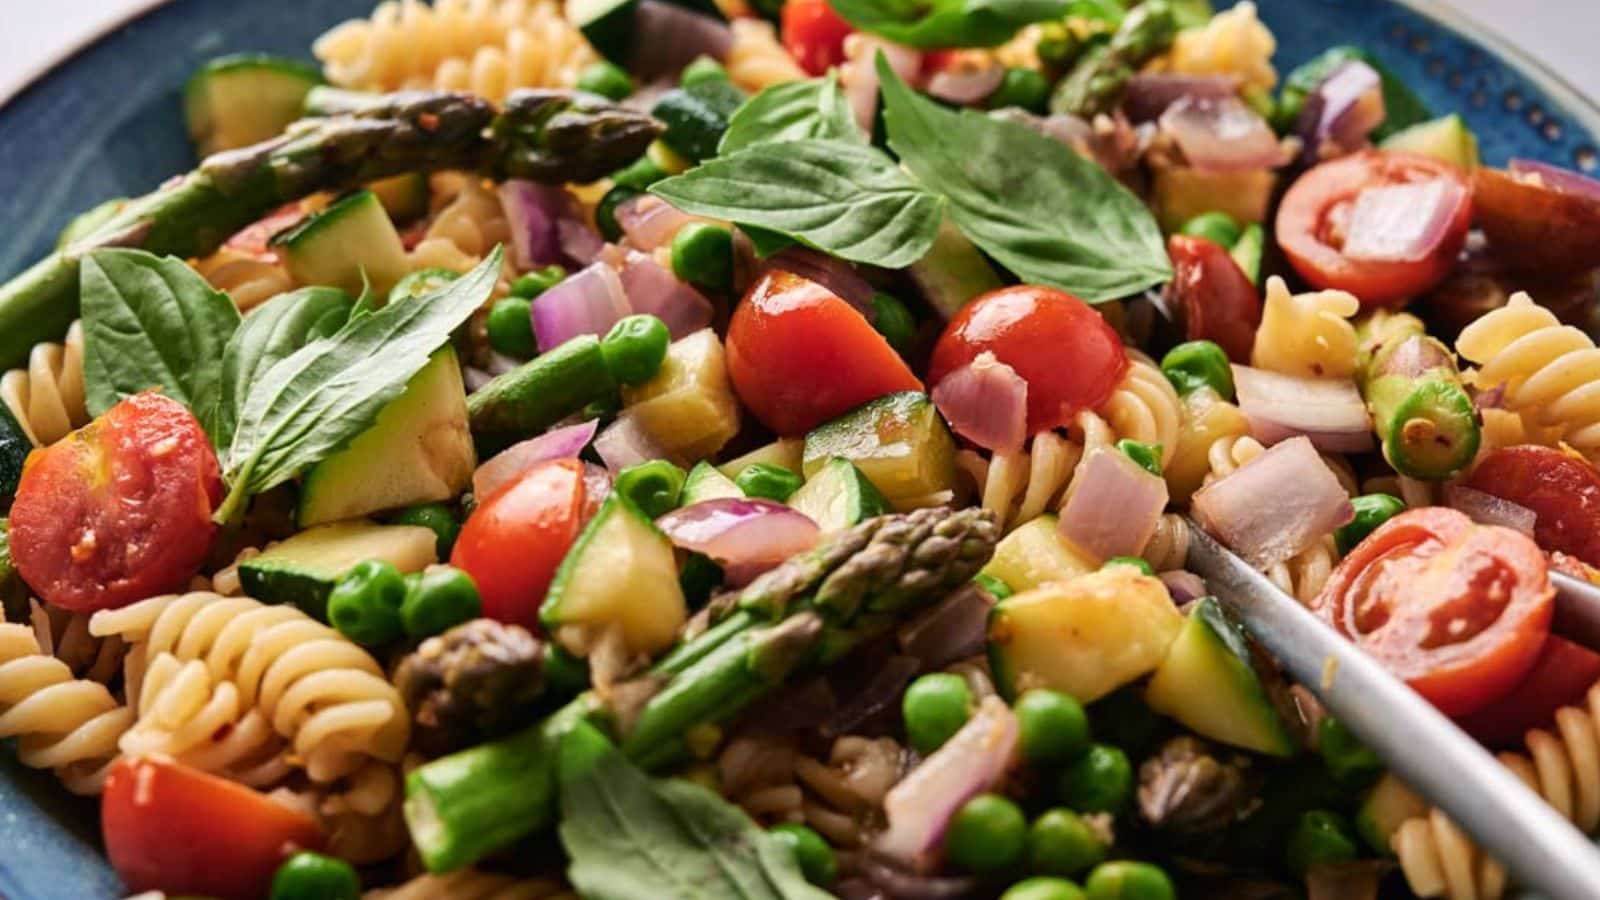 <p>Craving something hearty yet full of greens? Pasta Primavera packs a veggie punch in a dish that’s both colorful and nourishing. It’s a perfect choice for those nights when you want a meal that fills you up without weighing you down. Plus, it’s versatile enough to toss in whatever veggies you have on hand.<br><strong>Get the Recipe: </strong><a href="https://www.splashoftaste.com/pasta-primavera/?utm_source=msn&utm_medium=page&utm_campaign=msn">Pasta Primavera</a></p>